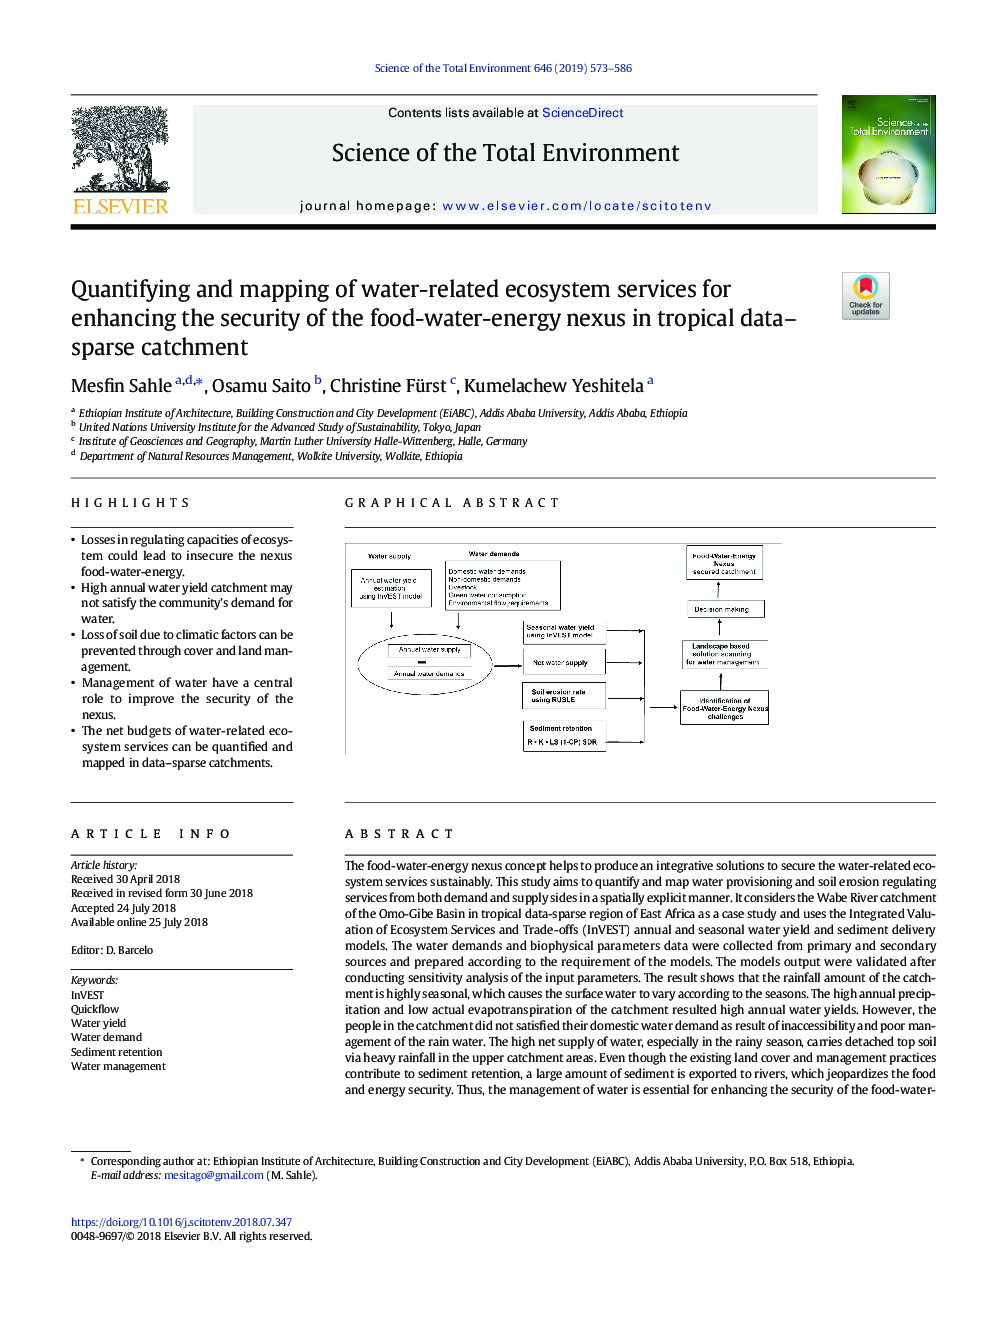 Quantifying and mapping of water-related ecosystem services for enhancing the security of the food-water-energy nexus in tropical data-sparse catchment